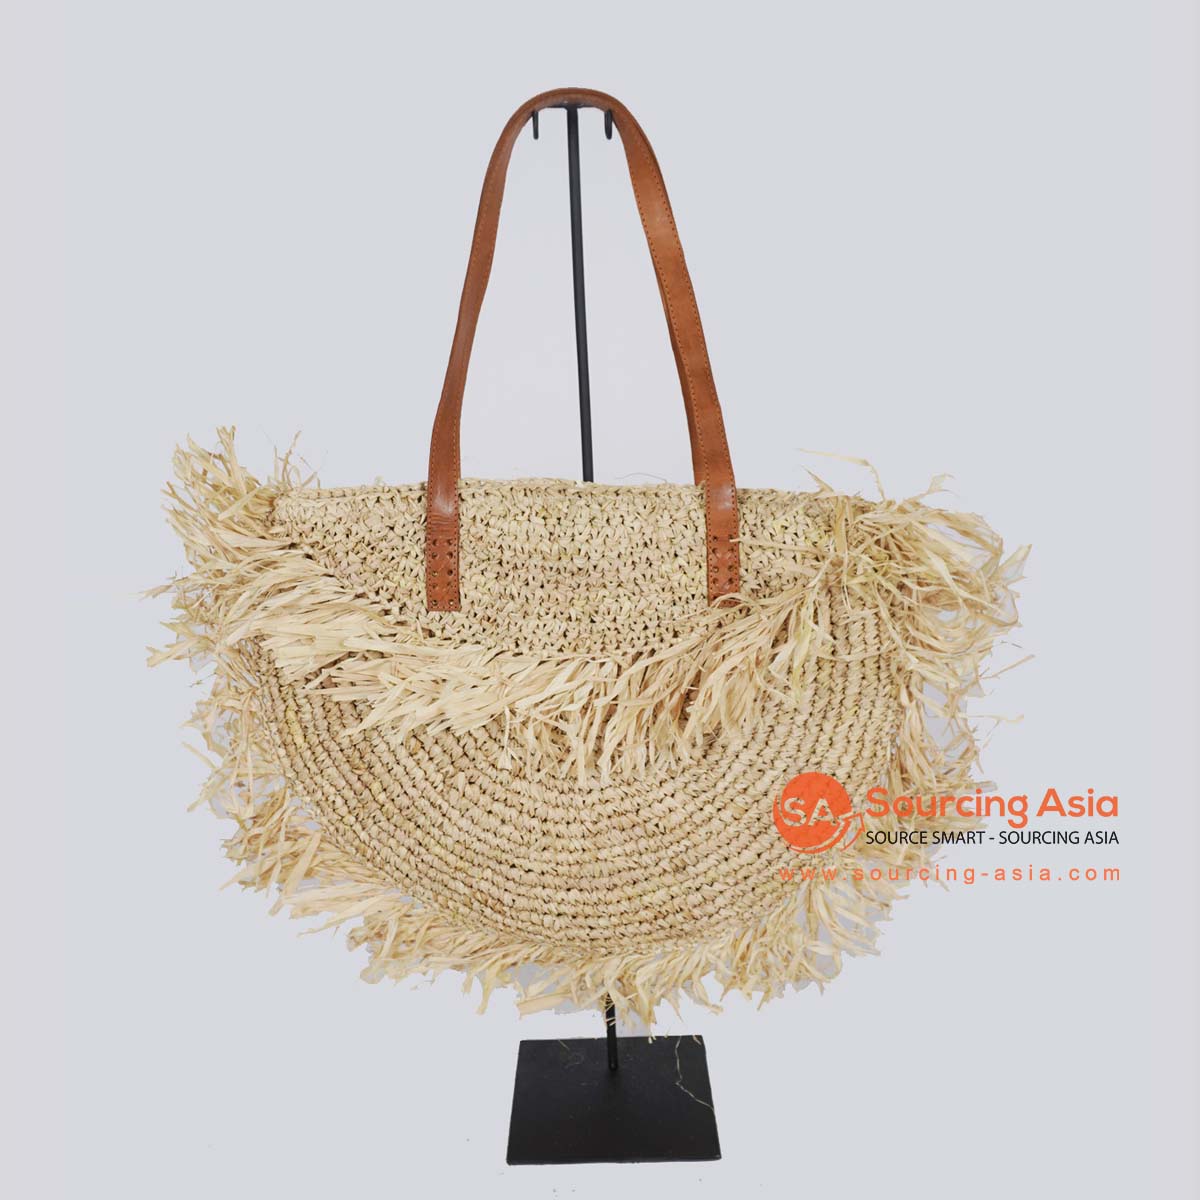 HBSC287 NATURAL GAJIH BAG WITH FRINGE AND LEATHER HANDLE